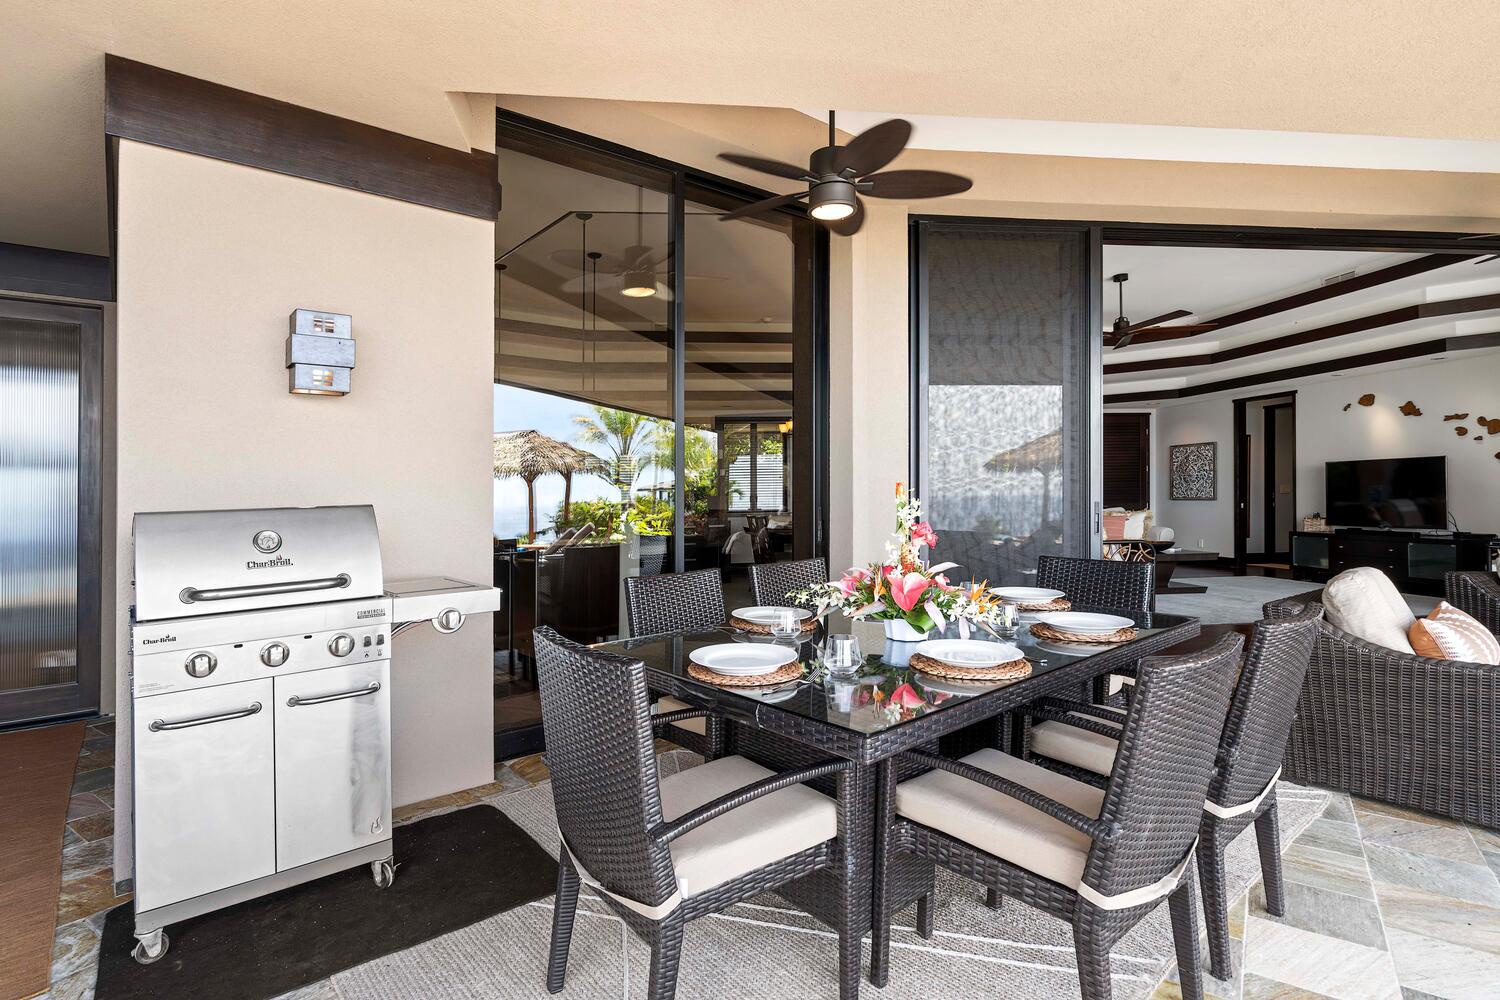 Kailua Kona Vacation Rentals, Island Oasis - Savor sumptuous meals in the outdoor dining for 6, just steps from the kitchen